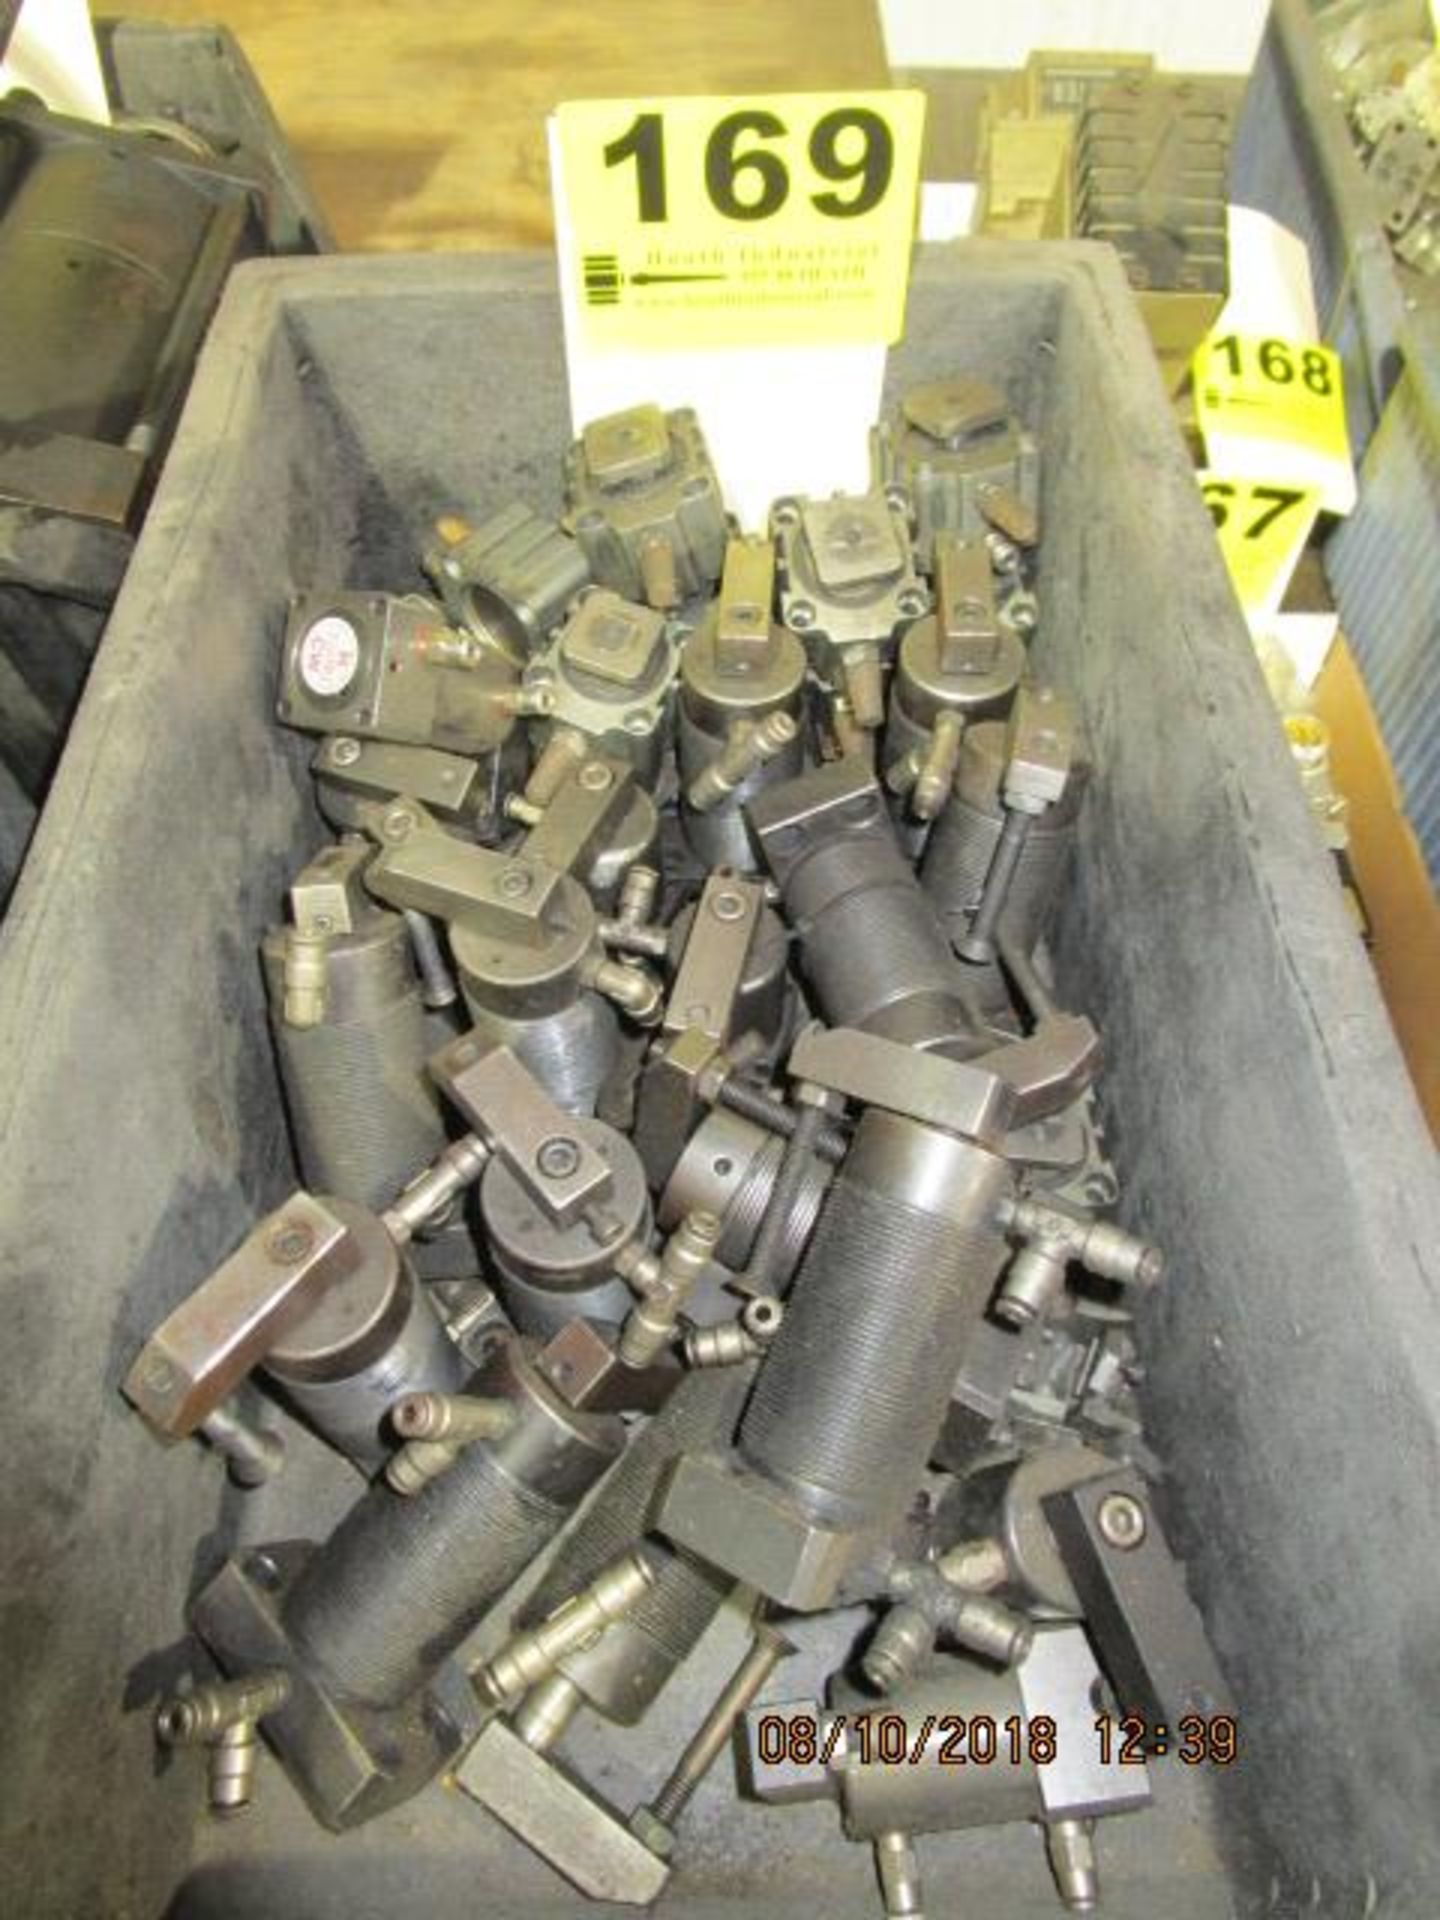 ASSORTED AIR CYLINDERS IN TOTE